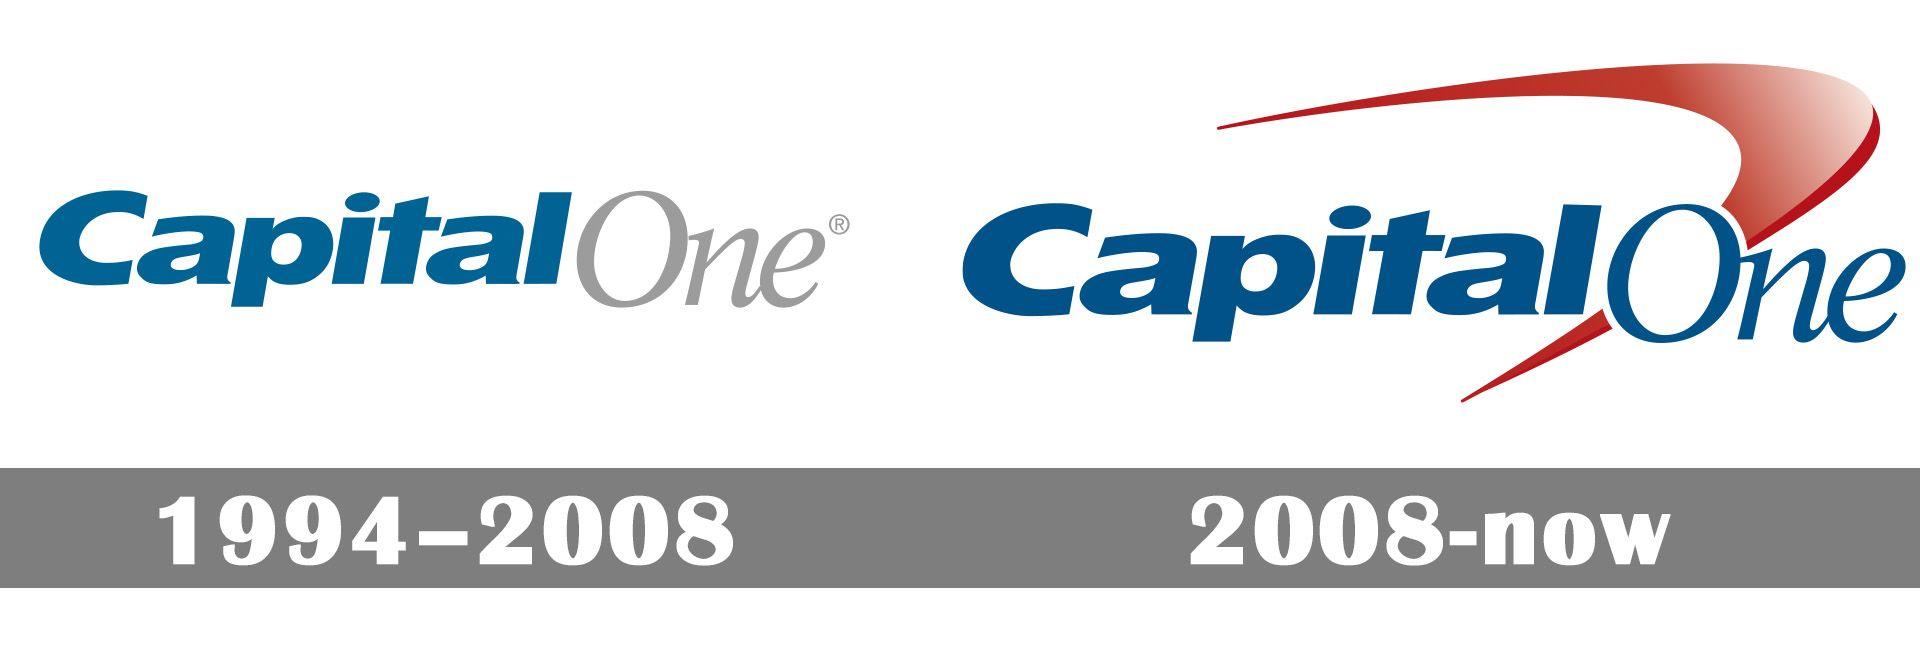 New Capital One Logo - Capital One logo, symbol, meaning, History and Evolution